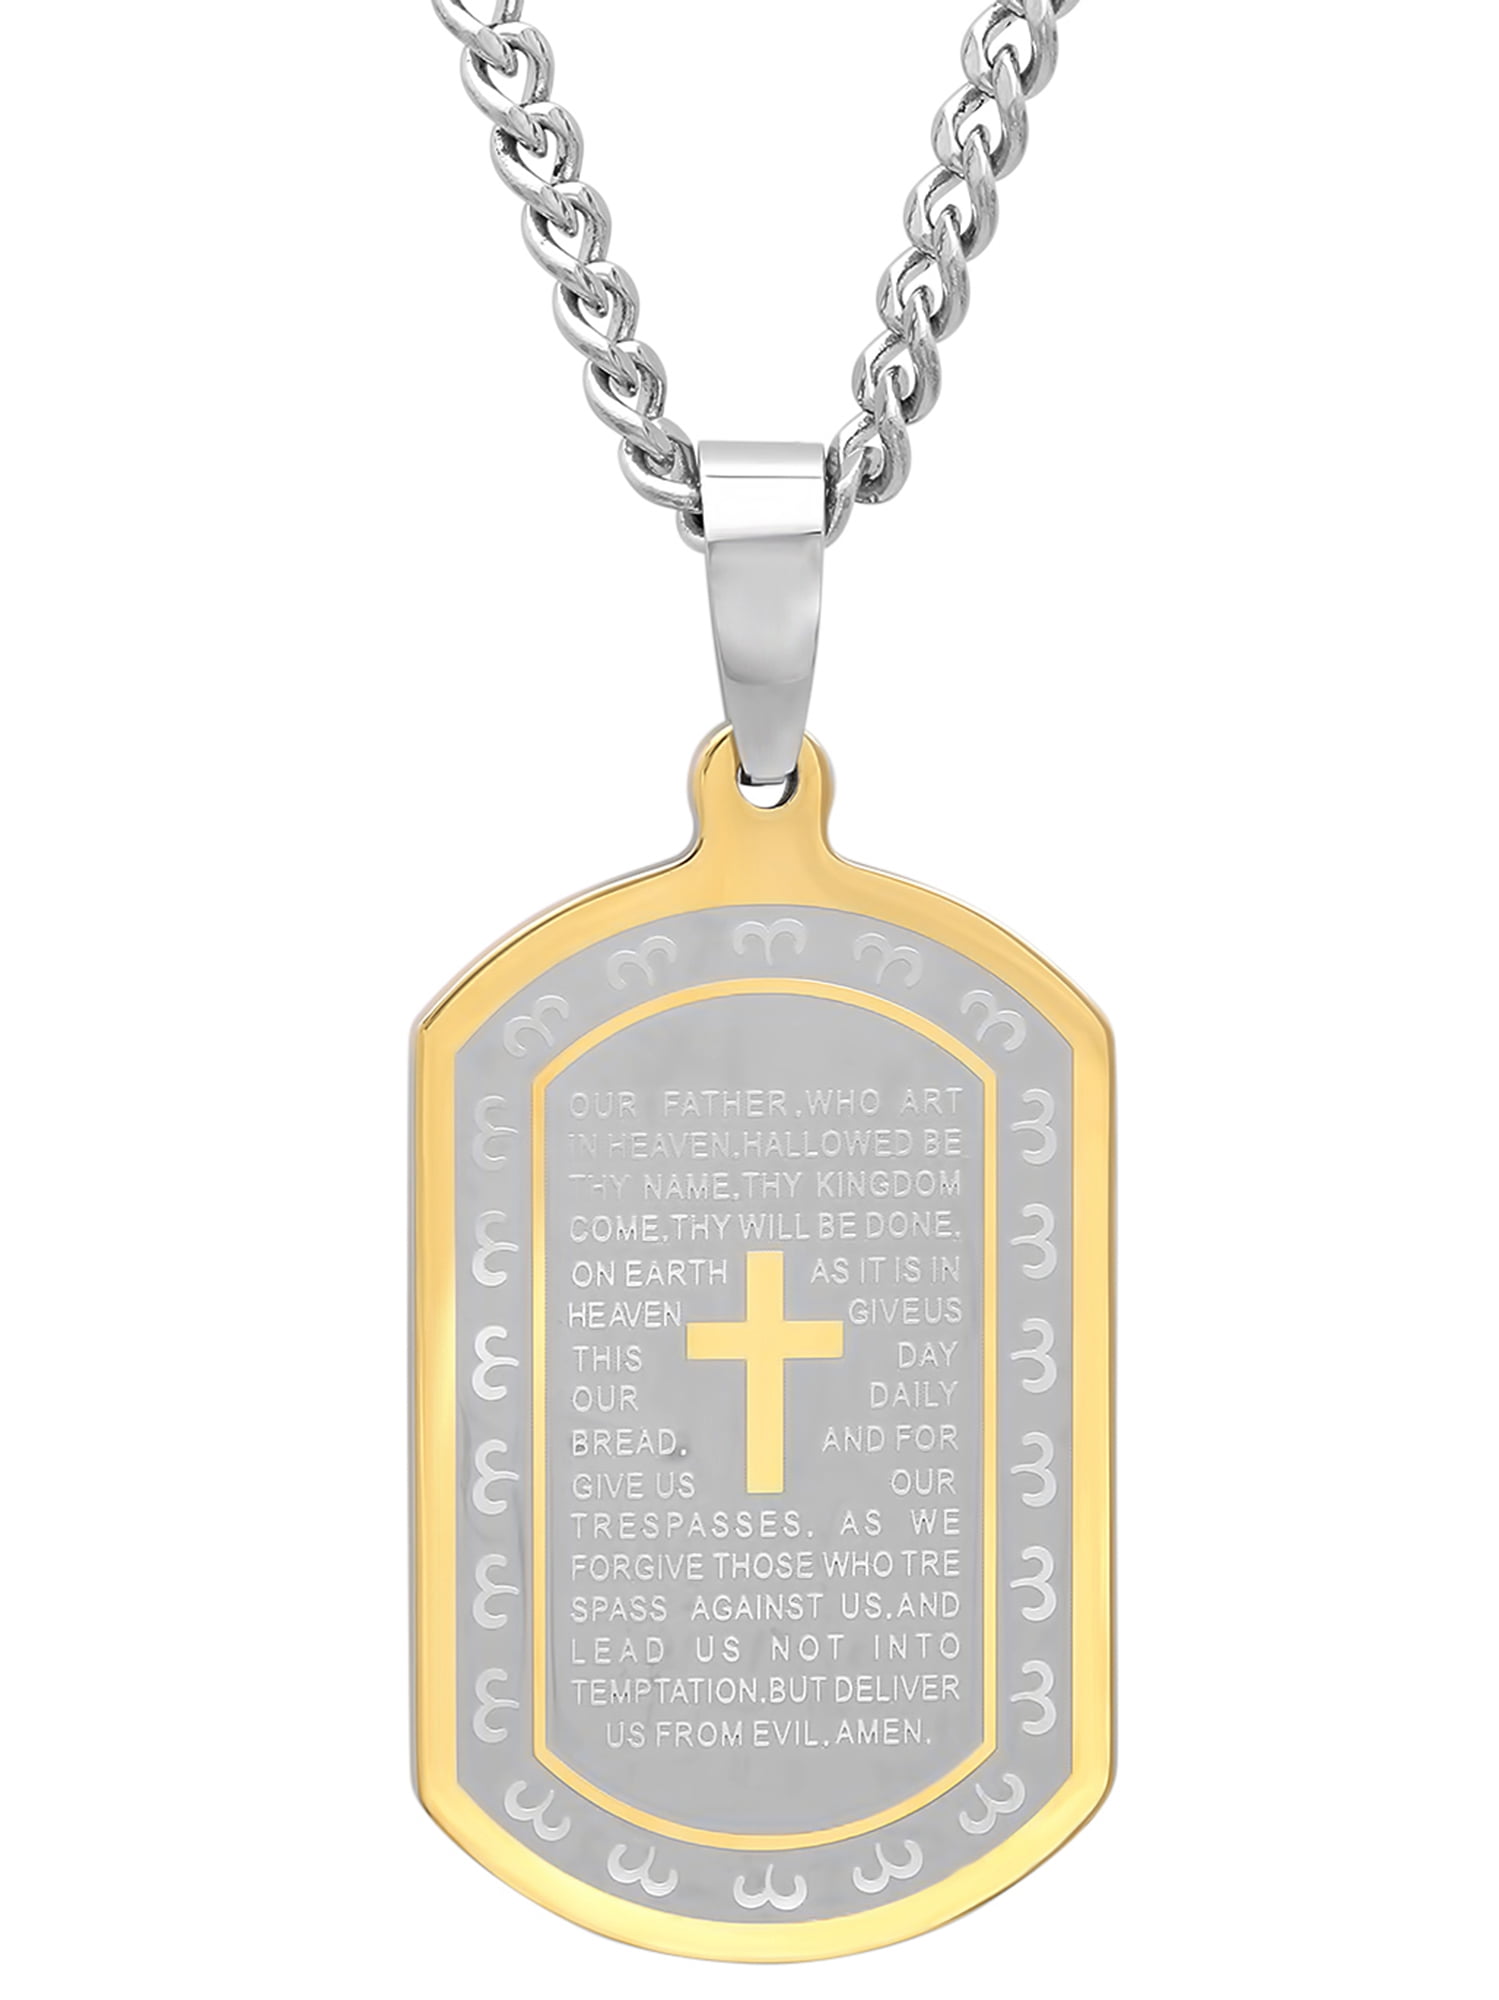 BLAKE Stainless Steel Dog Tag Cross Necklace for Men Boys Lord’s Prayer/Bible Verse Pendant with Wheat Chain 24 Inches P